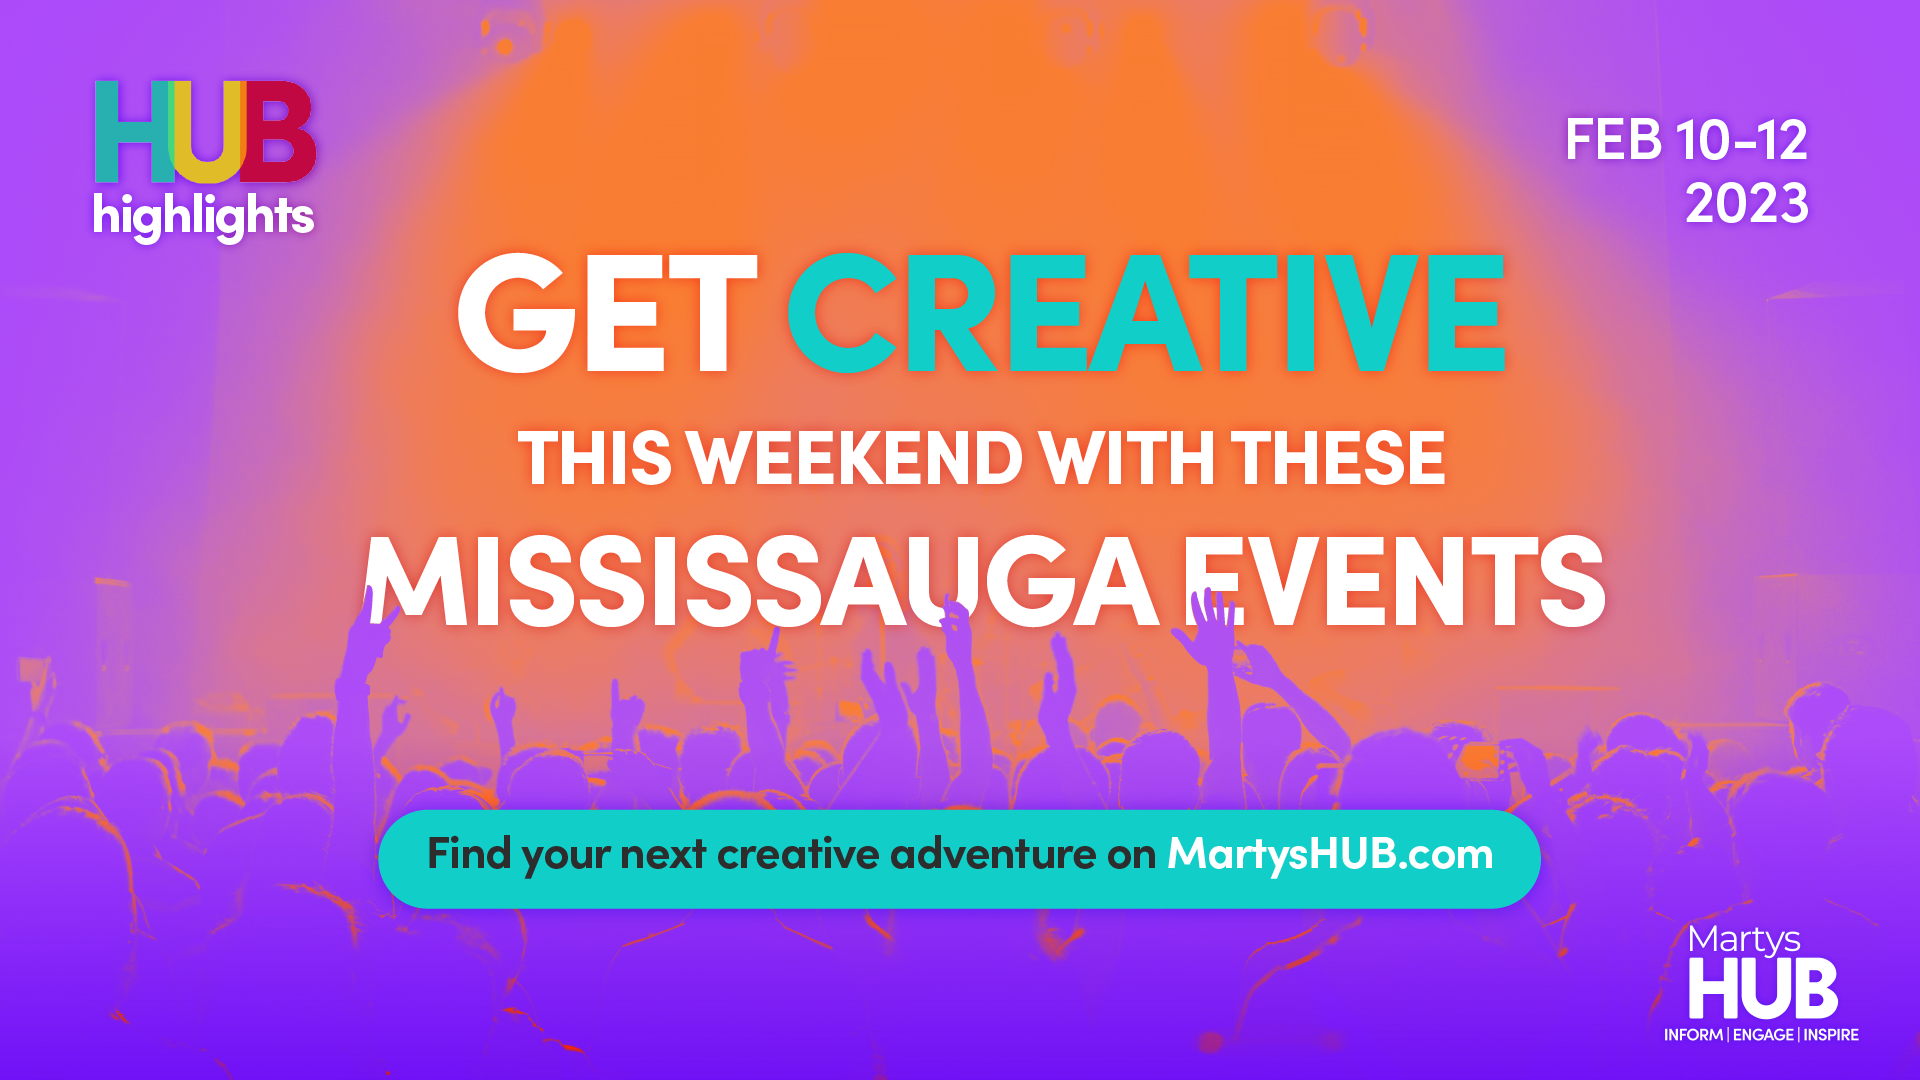 GET CREATIVE THIS WEEKEND WITH THESE EVENTS IN MISSISSAUGA (FEB 10-12)